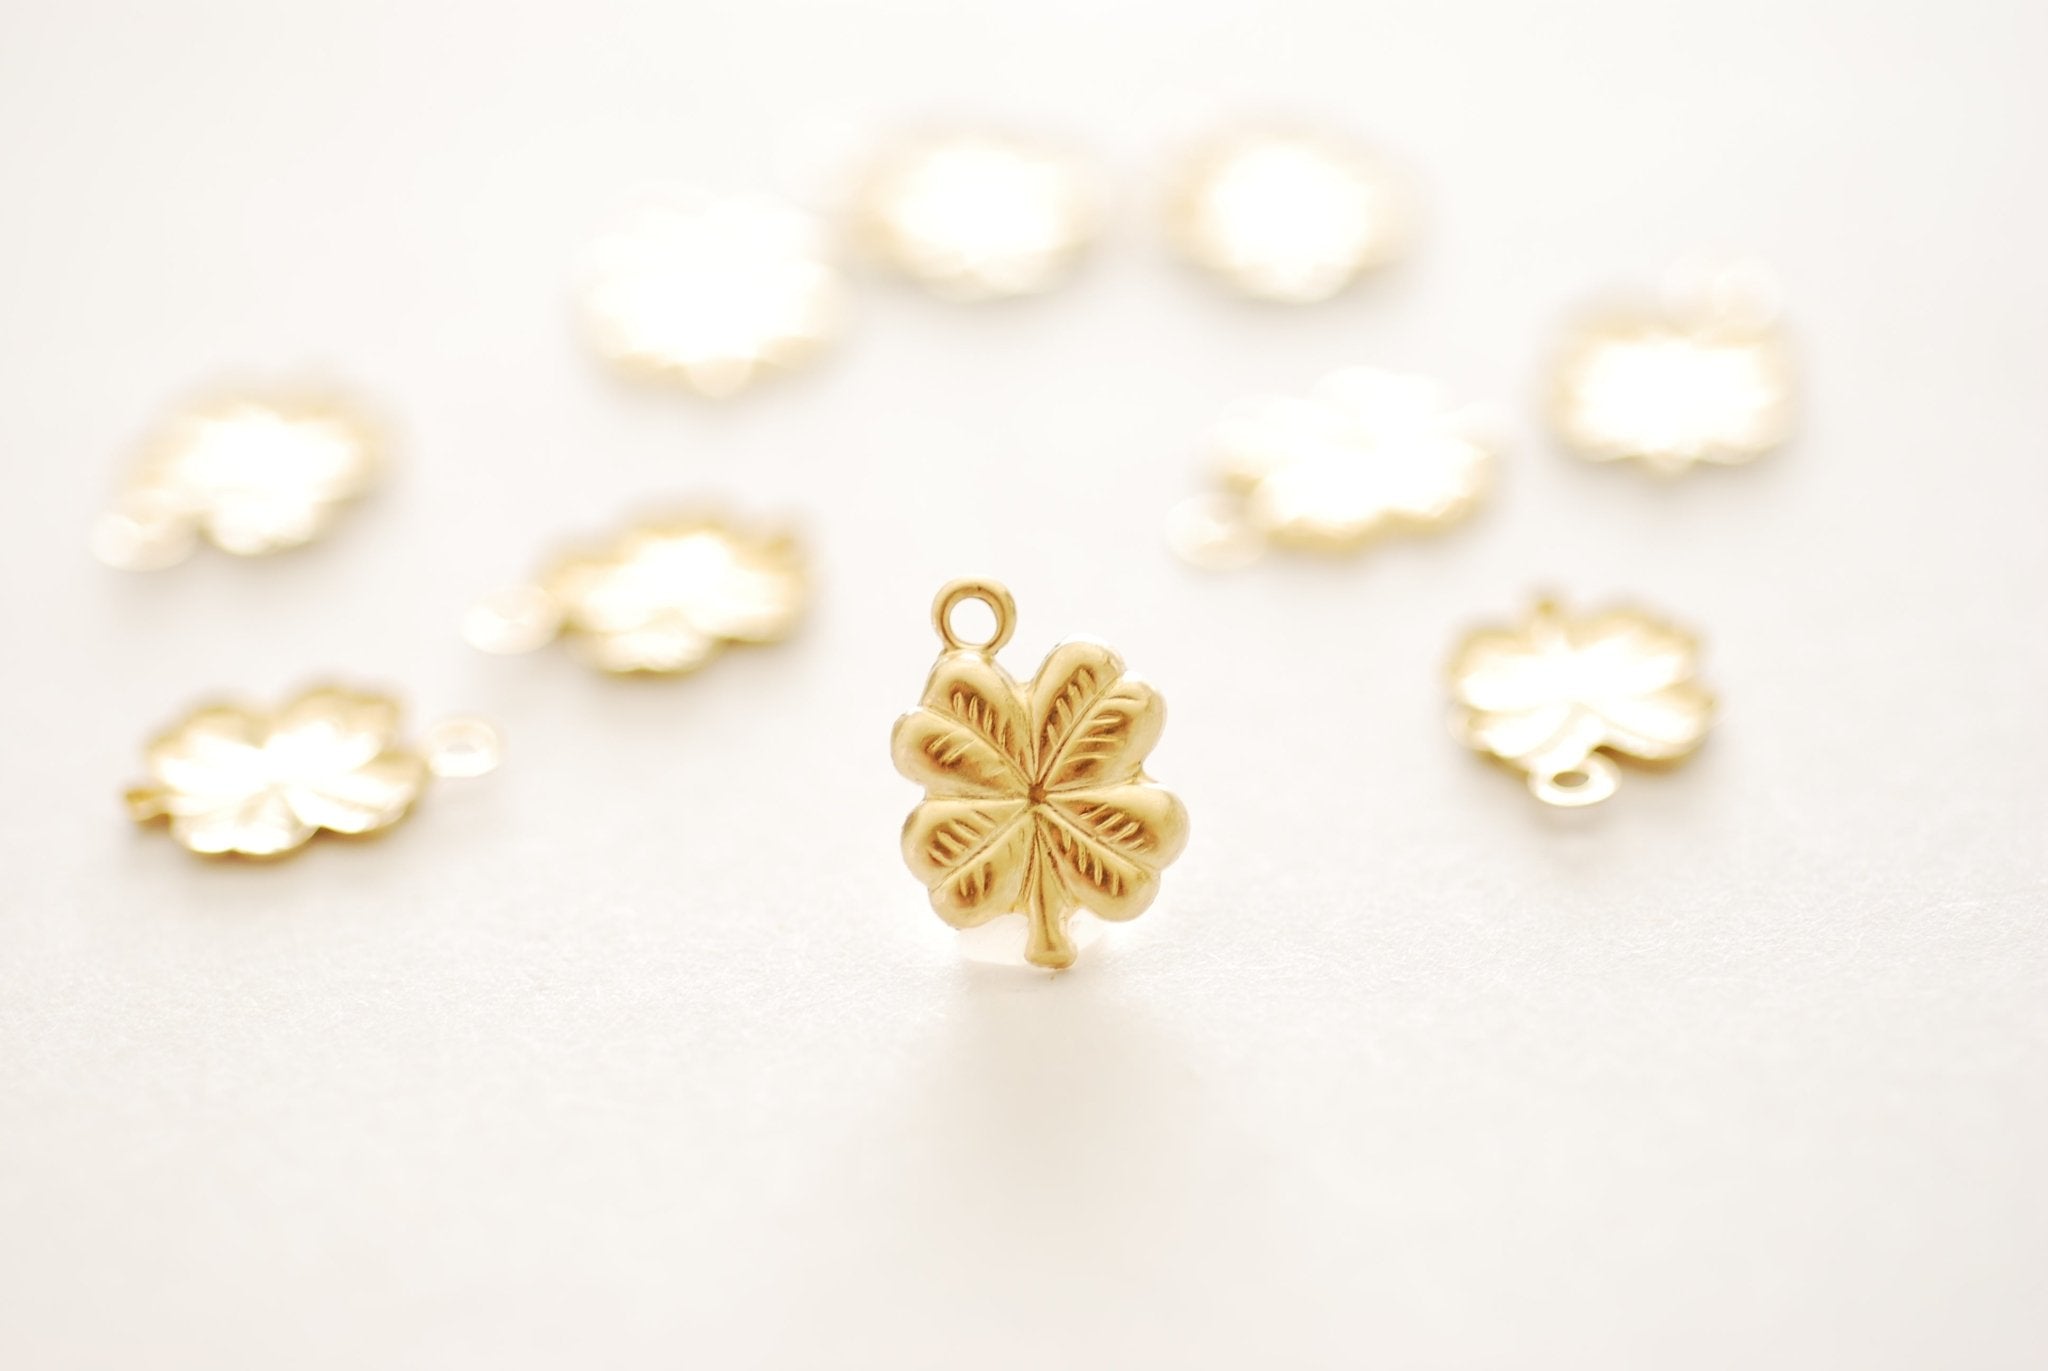 Wholesale Gold Filled Four Leaf Clover Drop Charm l Permanent Jewelry Lucky Irish Shamrock Clover Flower Charm - HarperCrown